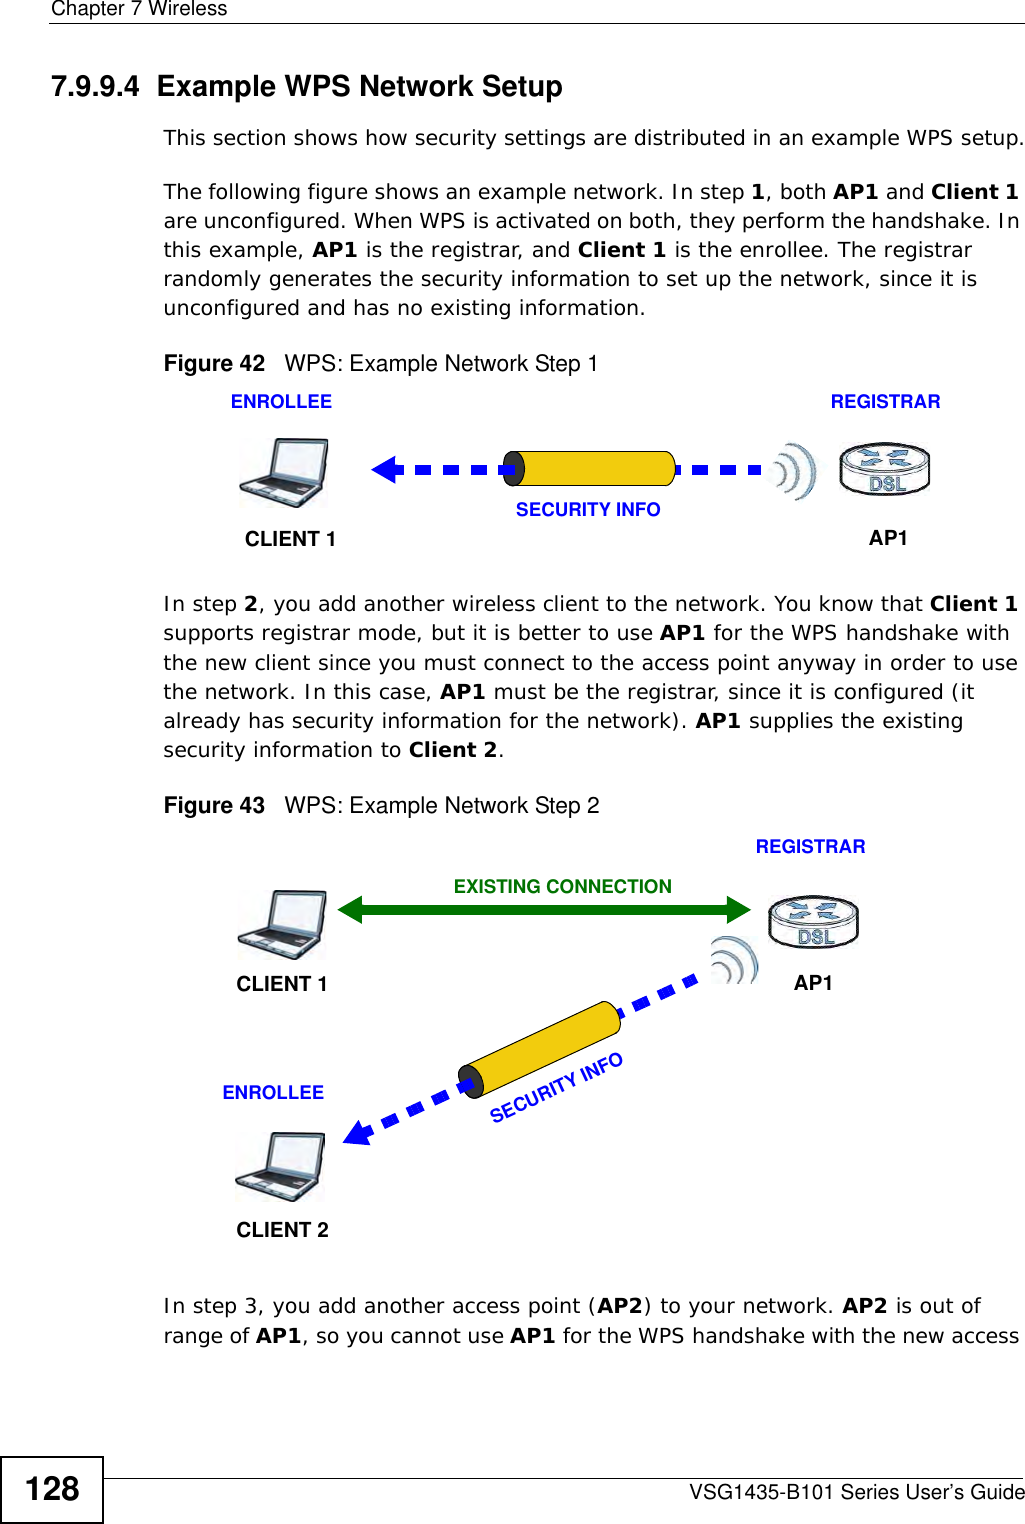 Chapter 7 WirelessVSG1435-B101 Series User’s Guide1287.9.9.4  Example WPS Network SetupThis section shows how security settings are distributed in an example WPS setup.The following figure shows an example network. In step 1, both AP1 and Client 1 are unconfigured. When WPS is activated on both, they perform the handshake. In this example, AP1 is the registrar, and Client 1 is the enrollee. The registrar randomly generates the security information to set up the network, since it is unconfigured and has no existing information.Figure 42   WPS: Example Network Step 1In step 2, you add another wireless client to the network. You know that Client 1 supports registrar mode, but it is better to use AP1 for the WPS handshake with the new client since you must connect to the access point anyway in order to use the network. In this case, AP1 must be the registrar, since it is configured (it already has security information for the network). AP1 supplies the existing security information to Client 2.Figure 43   WPS: Example Network Step 2In step 3, you add another access point (AP2) to your network. AP2 is out of range of AP1, so you cannot use AP1 for the WPS handshake with the new access REGISTRARENROLLEESECURITY INFOCLIENT 1 AP1REGISTRARCLIENT 1 AP1ENROLLEECLIENT 2EXISTING CONNECTIONSECURITY INFO